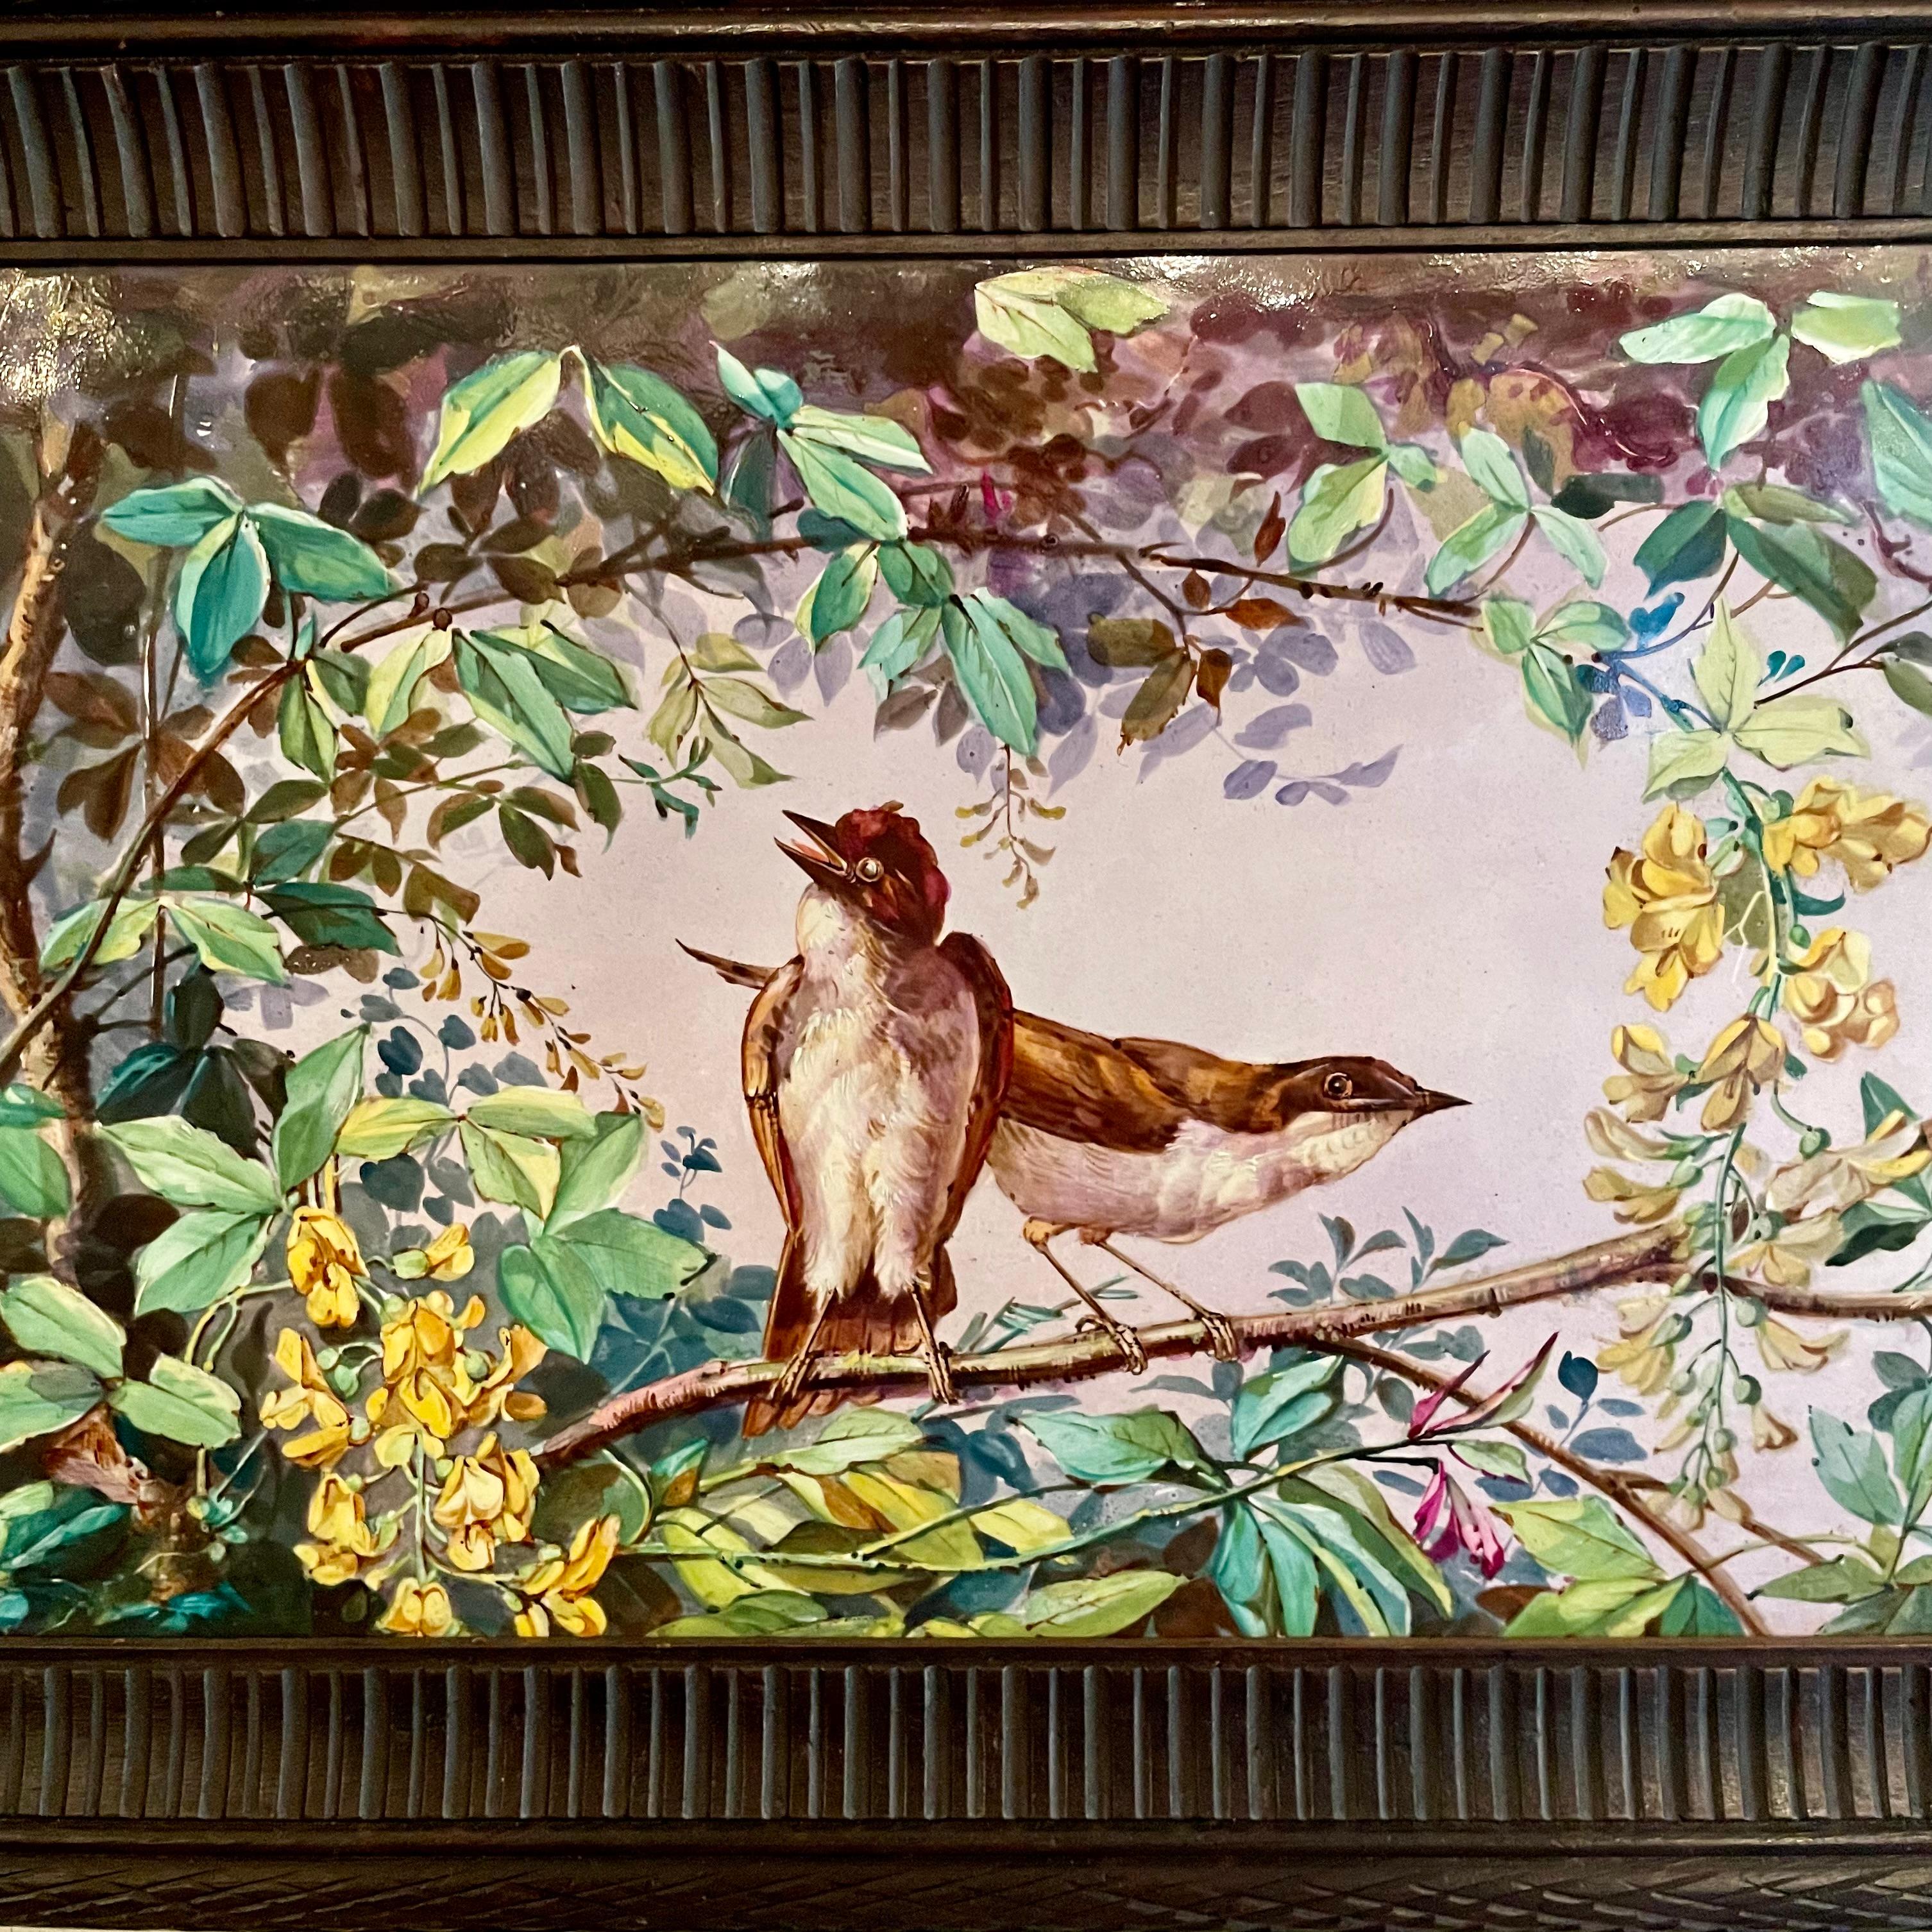 Framed Antique Painted Porcelain Wall Plaque of Birds on a Limb, Circa 1890-1900.